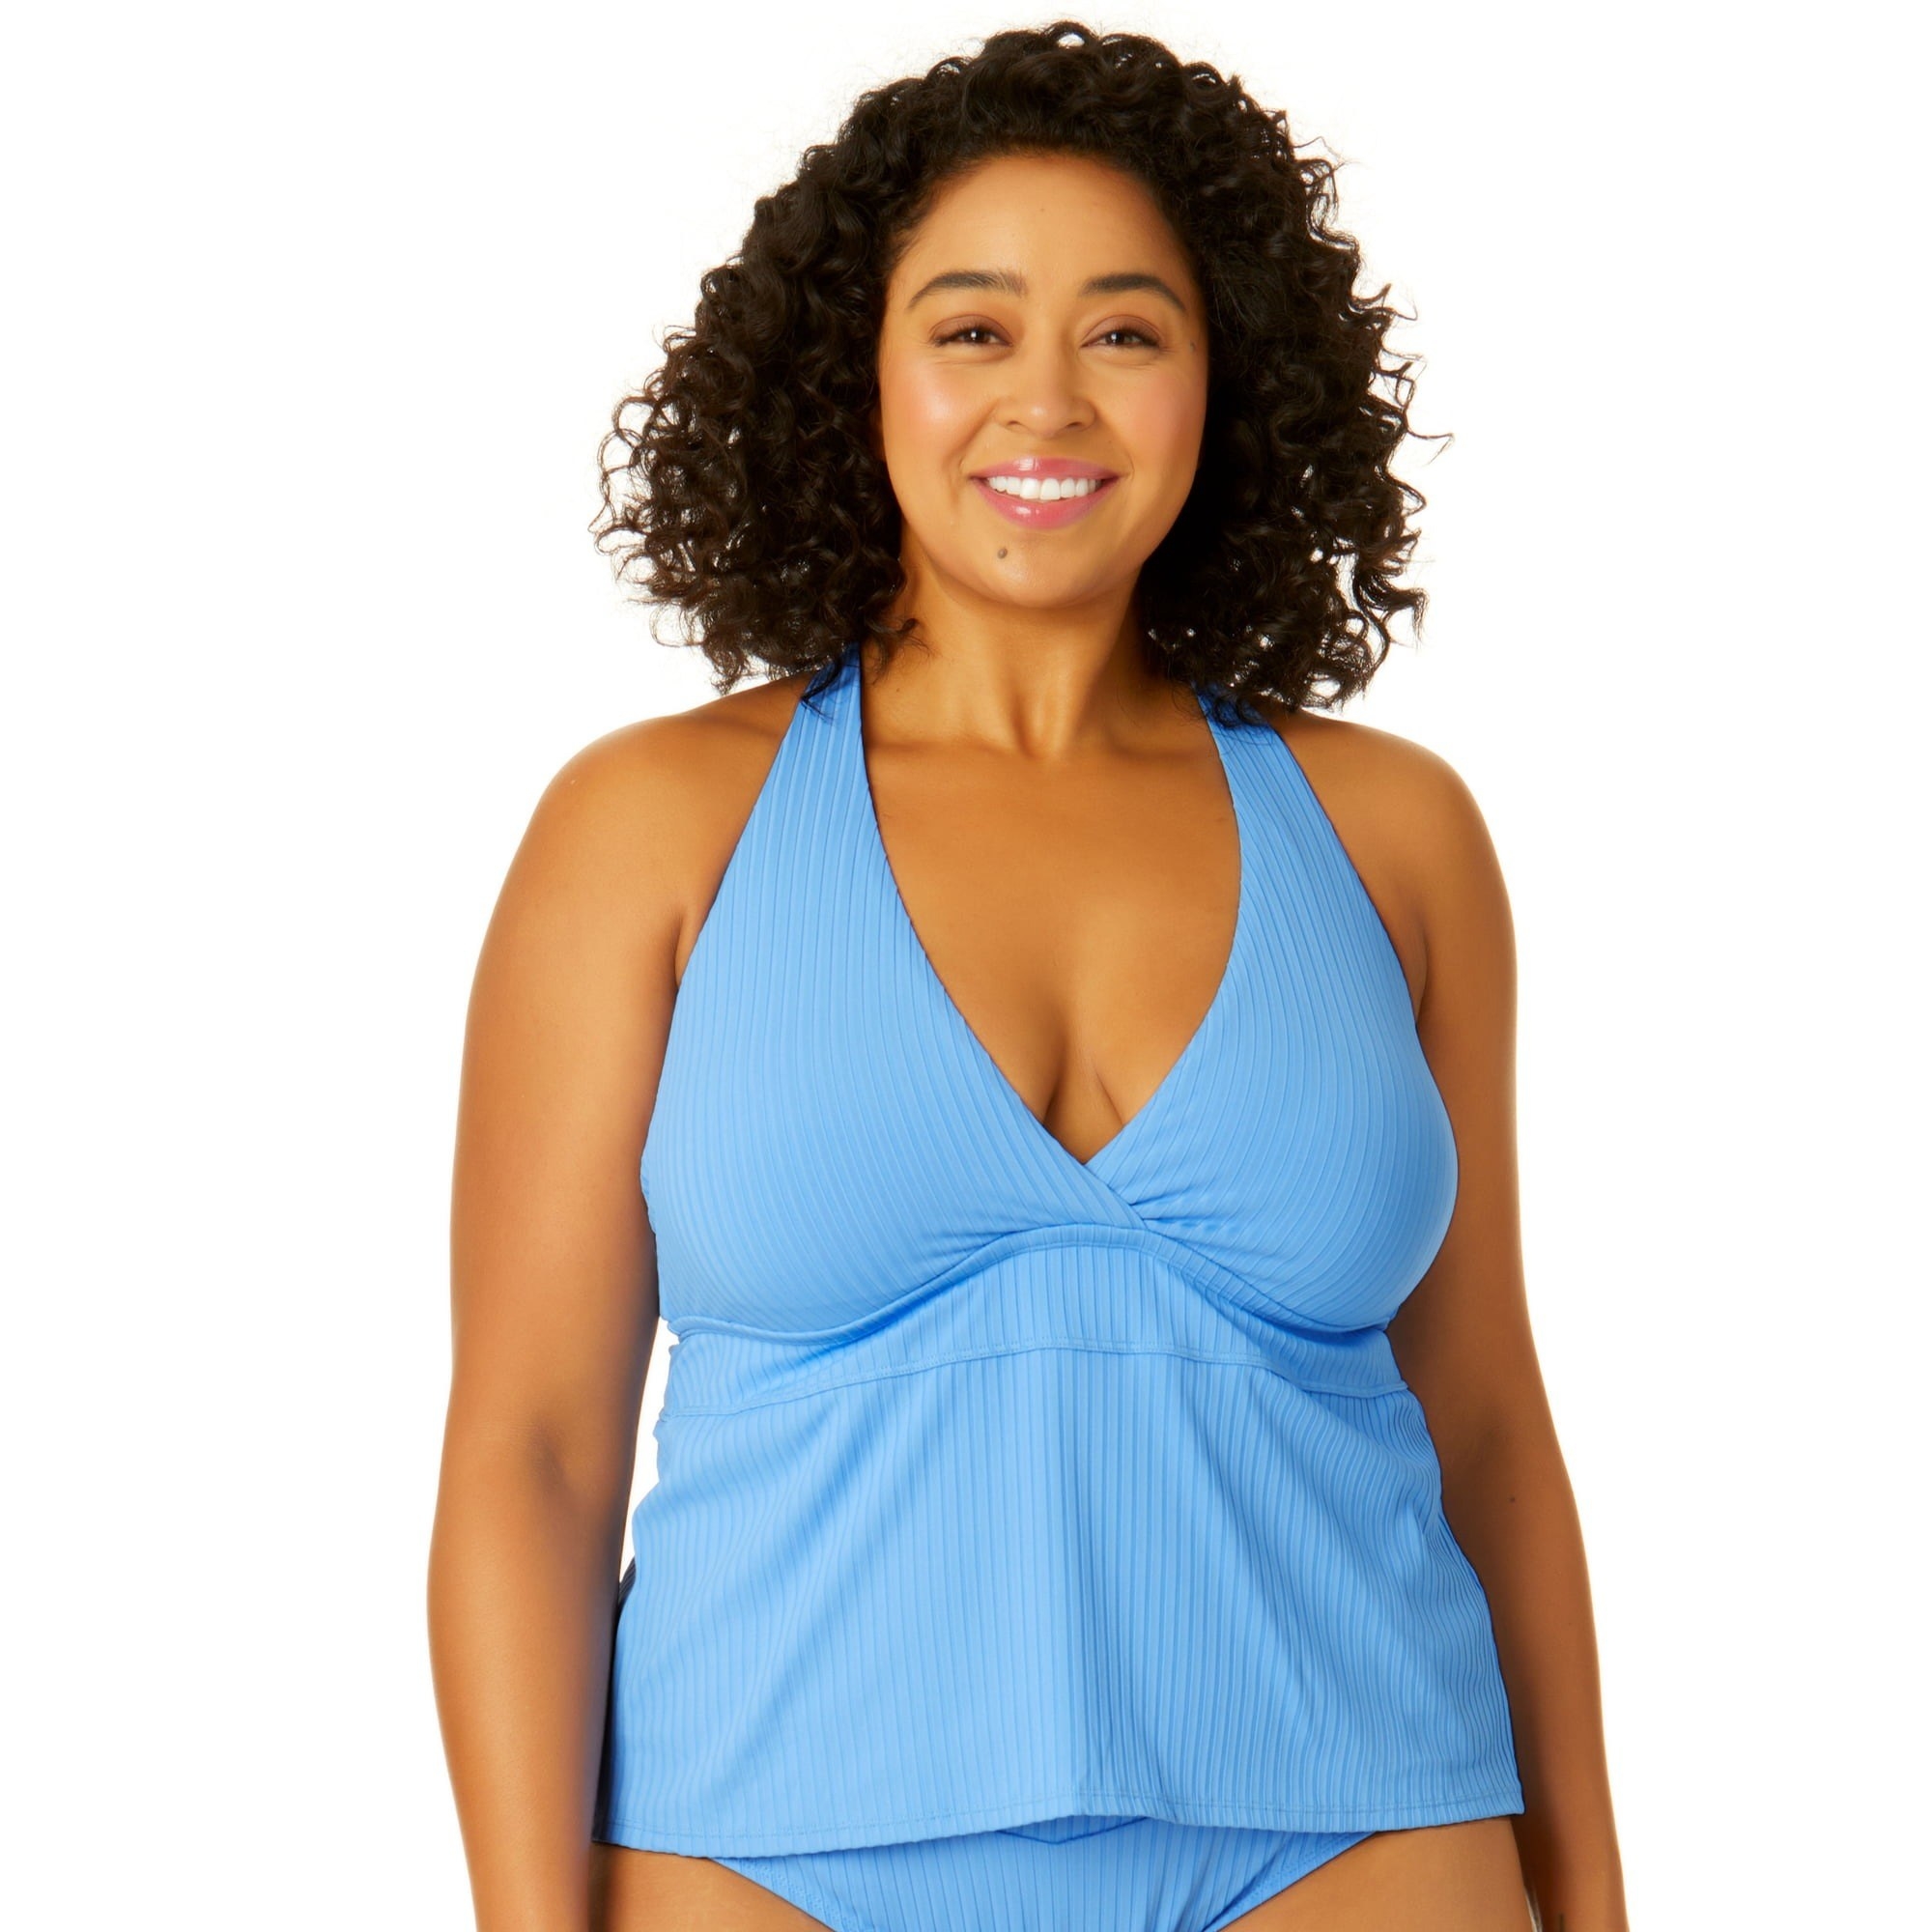 Model wearing ribbed blue tankini top with matching bottoms